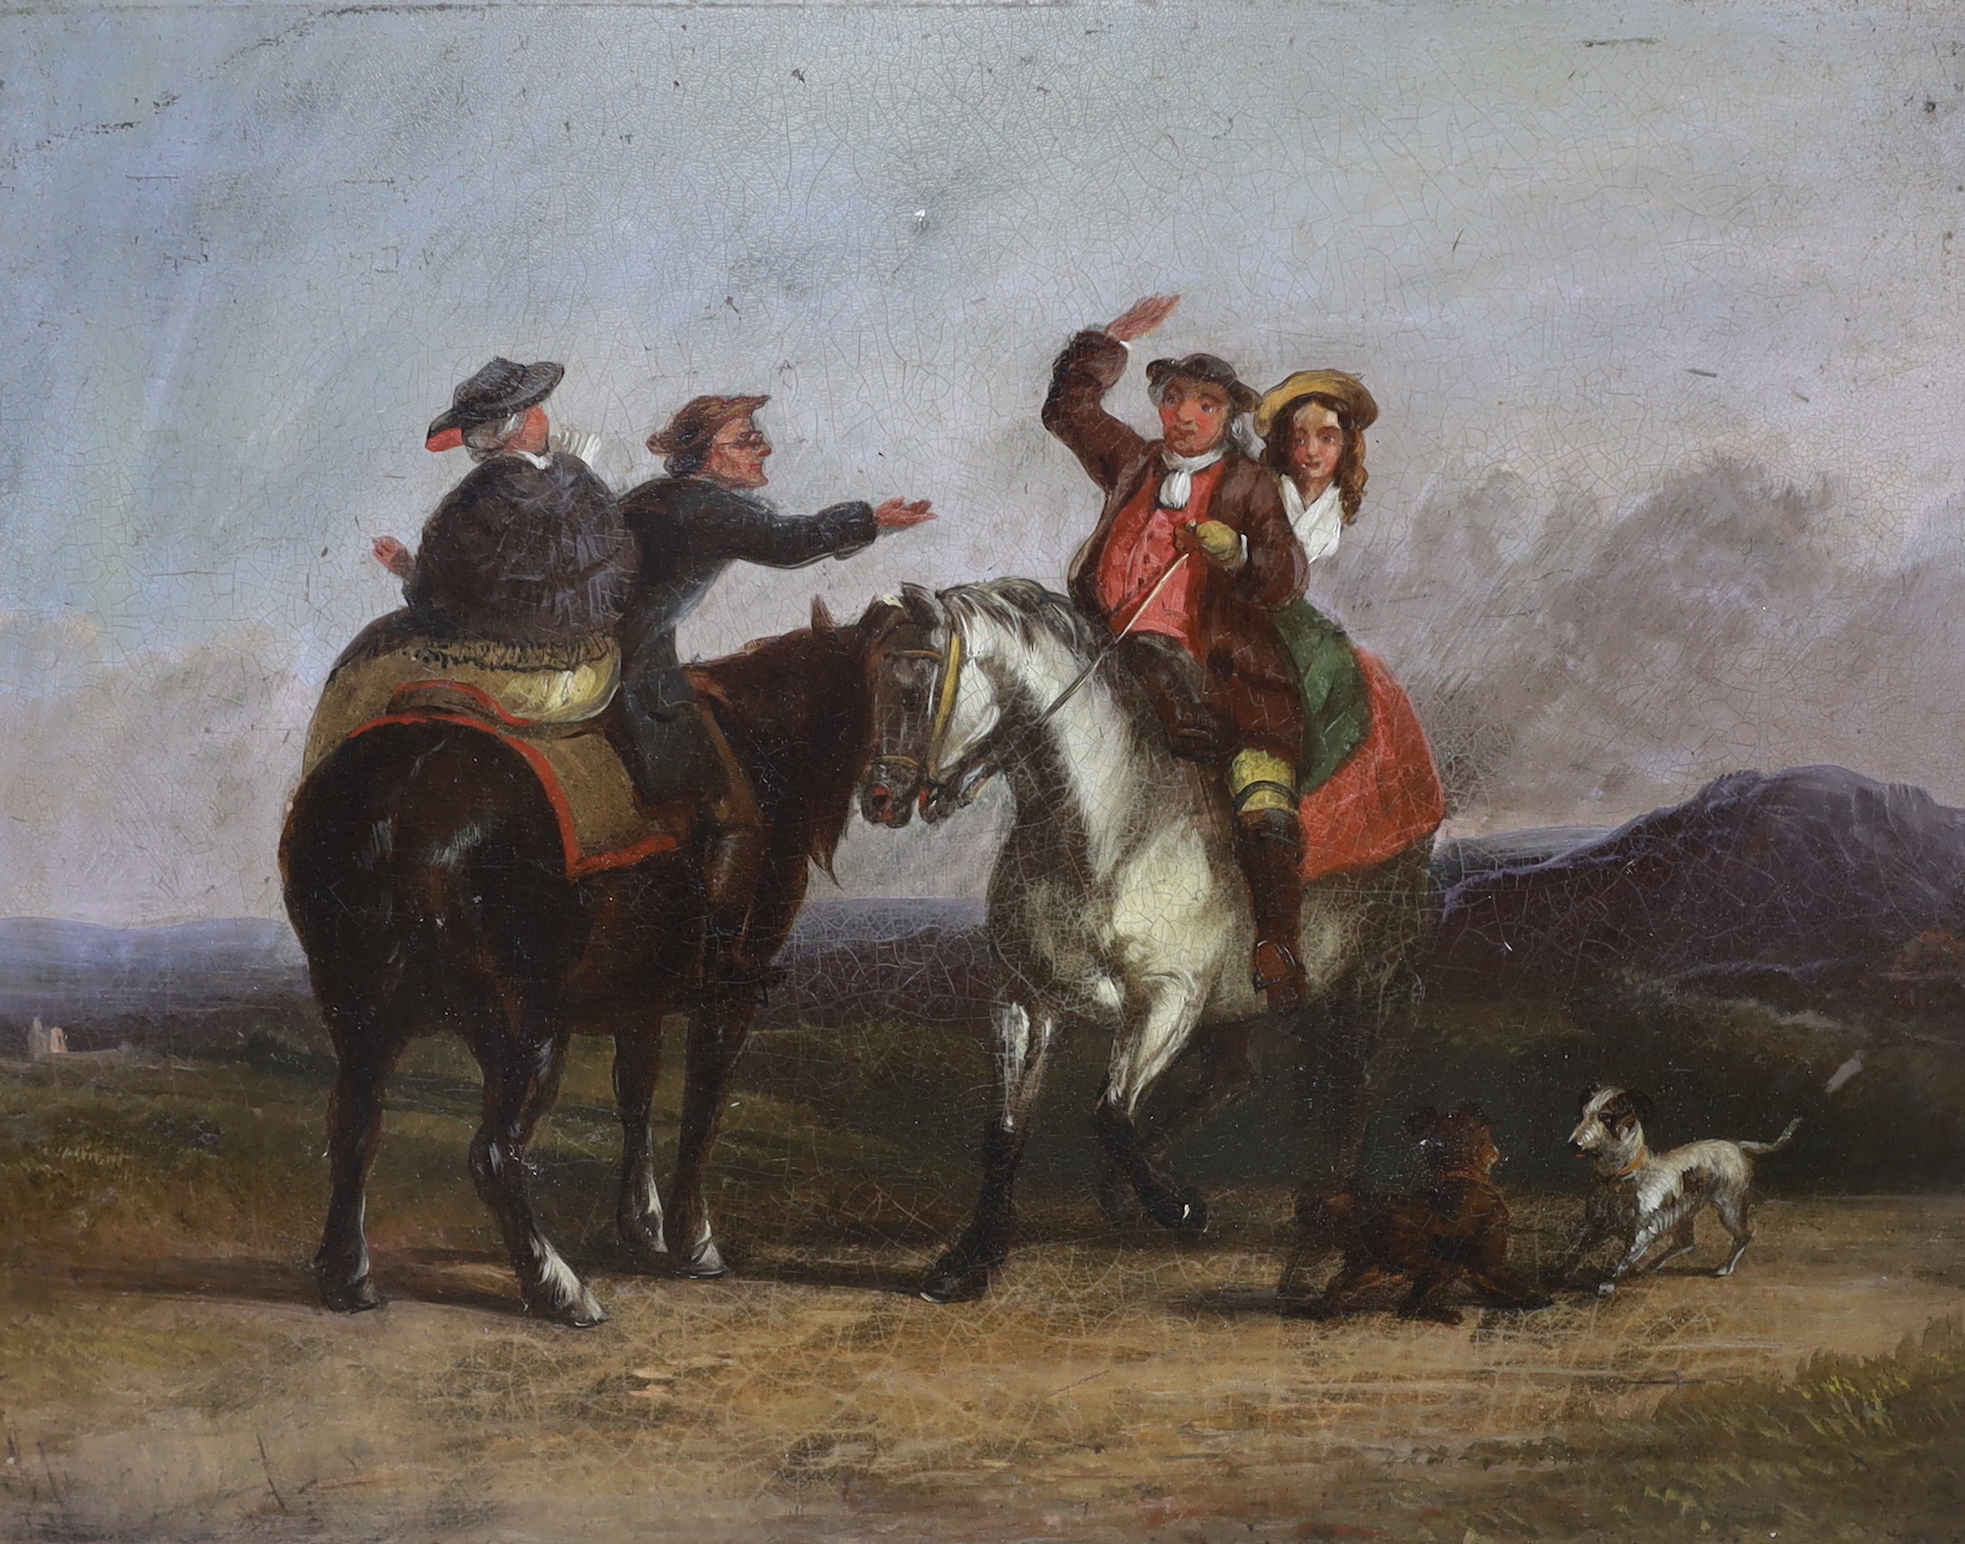 18th century style, oil on board, Figures on horseback before a landscape, indistinctly inscribed lower right, 22 x 29cm